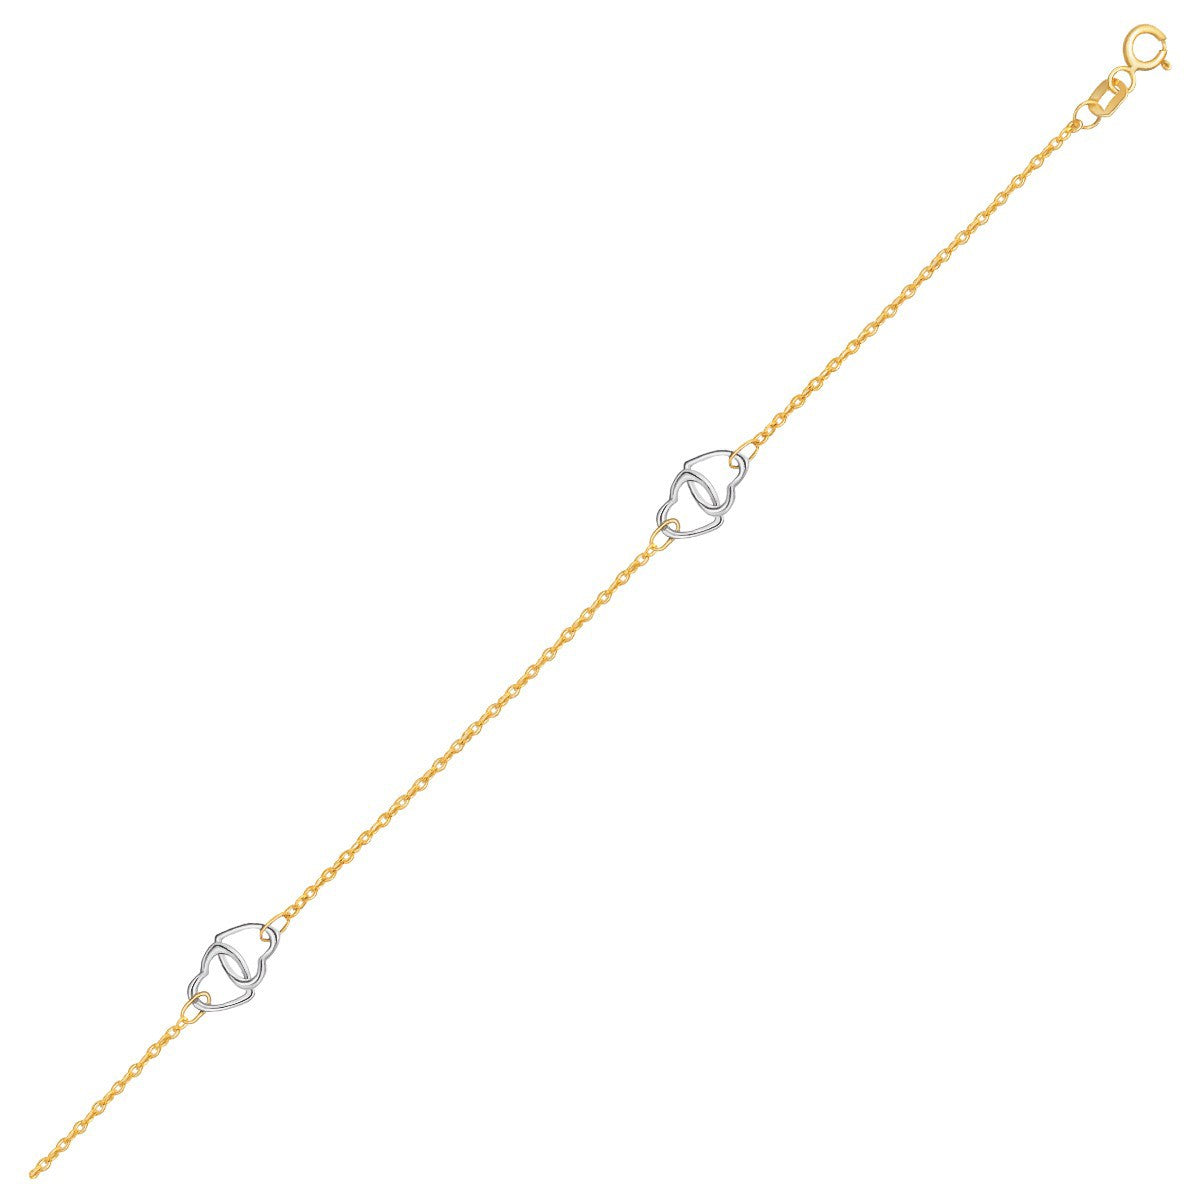 14k Two Tone Gold Entwined Heart Stationed Anklet